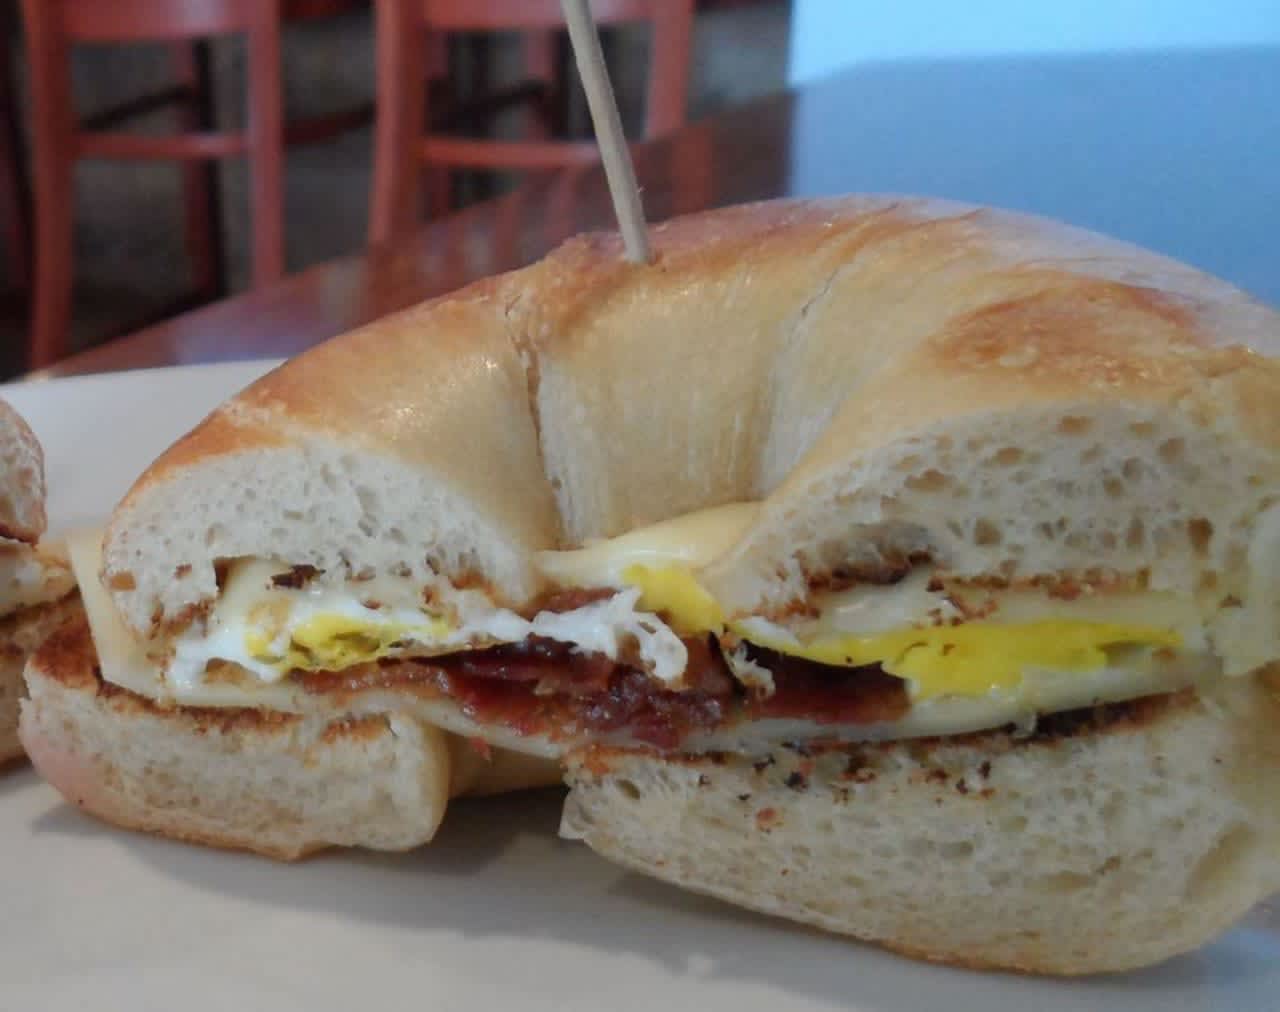 Yianni's Cafe in Brigantine is known for its savory bagel sandwiches like the ‘Meat Lovers’ (egg, bacon, pork roll, sausage patty and cheese) and the ‘Shore Favorite’ (egg, avocado, bacon and cheese).